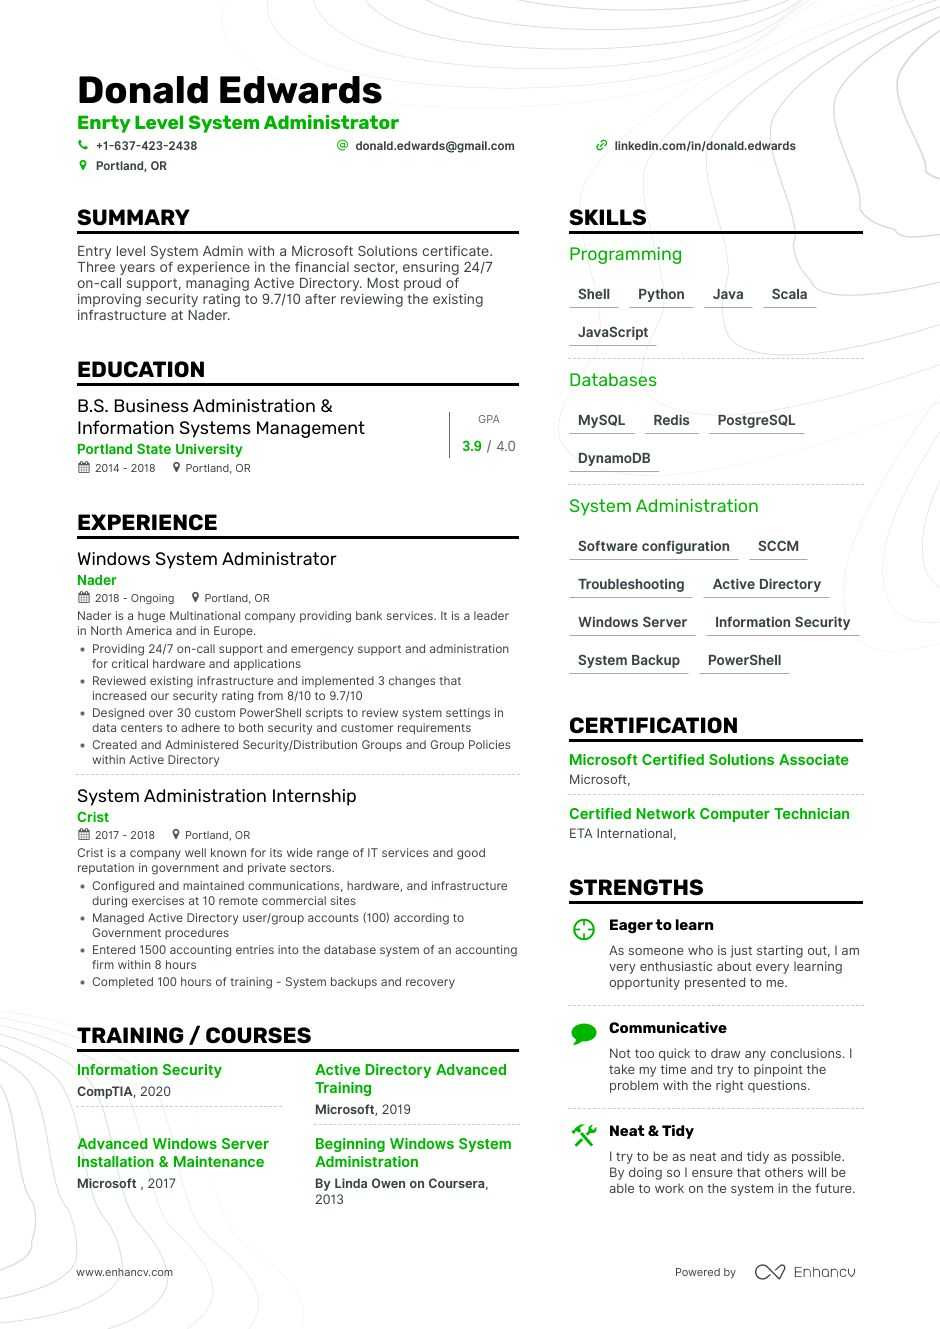 Sample Resume with Comp Tia Credentials System Administrator Resume: 4 Sys Admin Resume Examples & Guide …